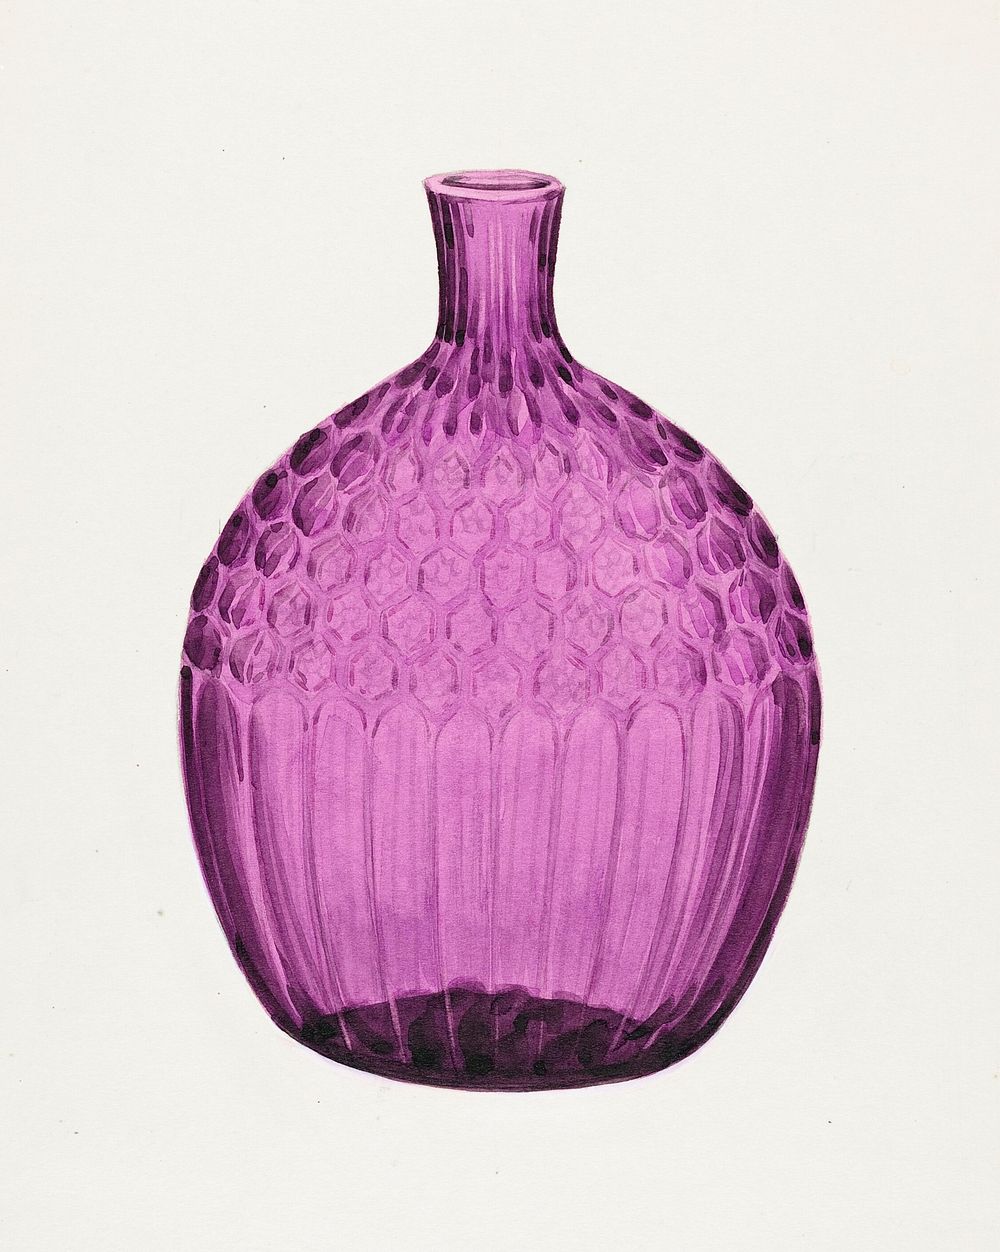 Flask (ca. 1936) by John Dana. Original from The National Gallery of Art. Digitally enhanced by rawpixel.